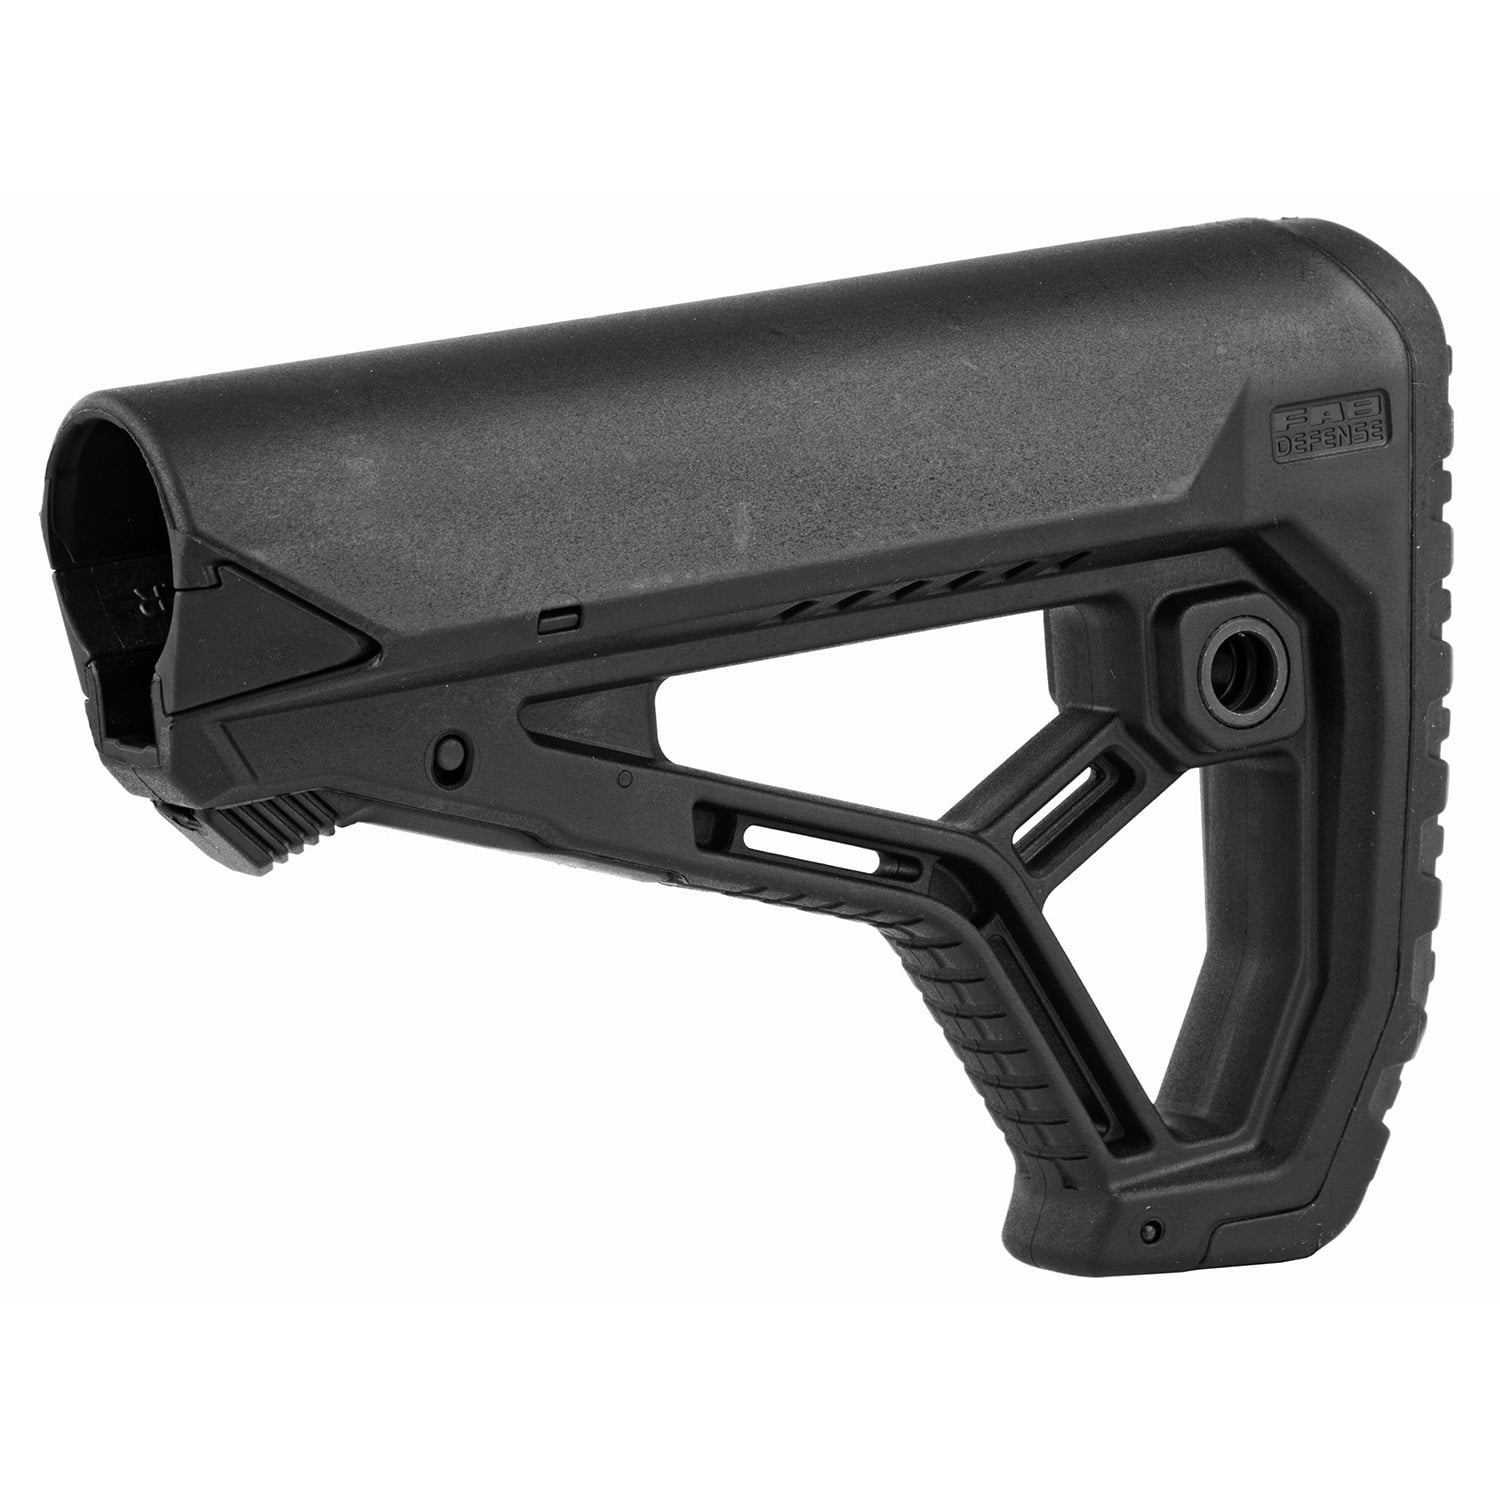 FAB Defense AR-15/M4 GL-CORE Buttstock - Fits Mil-Spec & Commercial Buffer Tubes